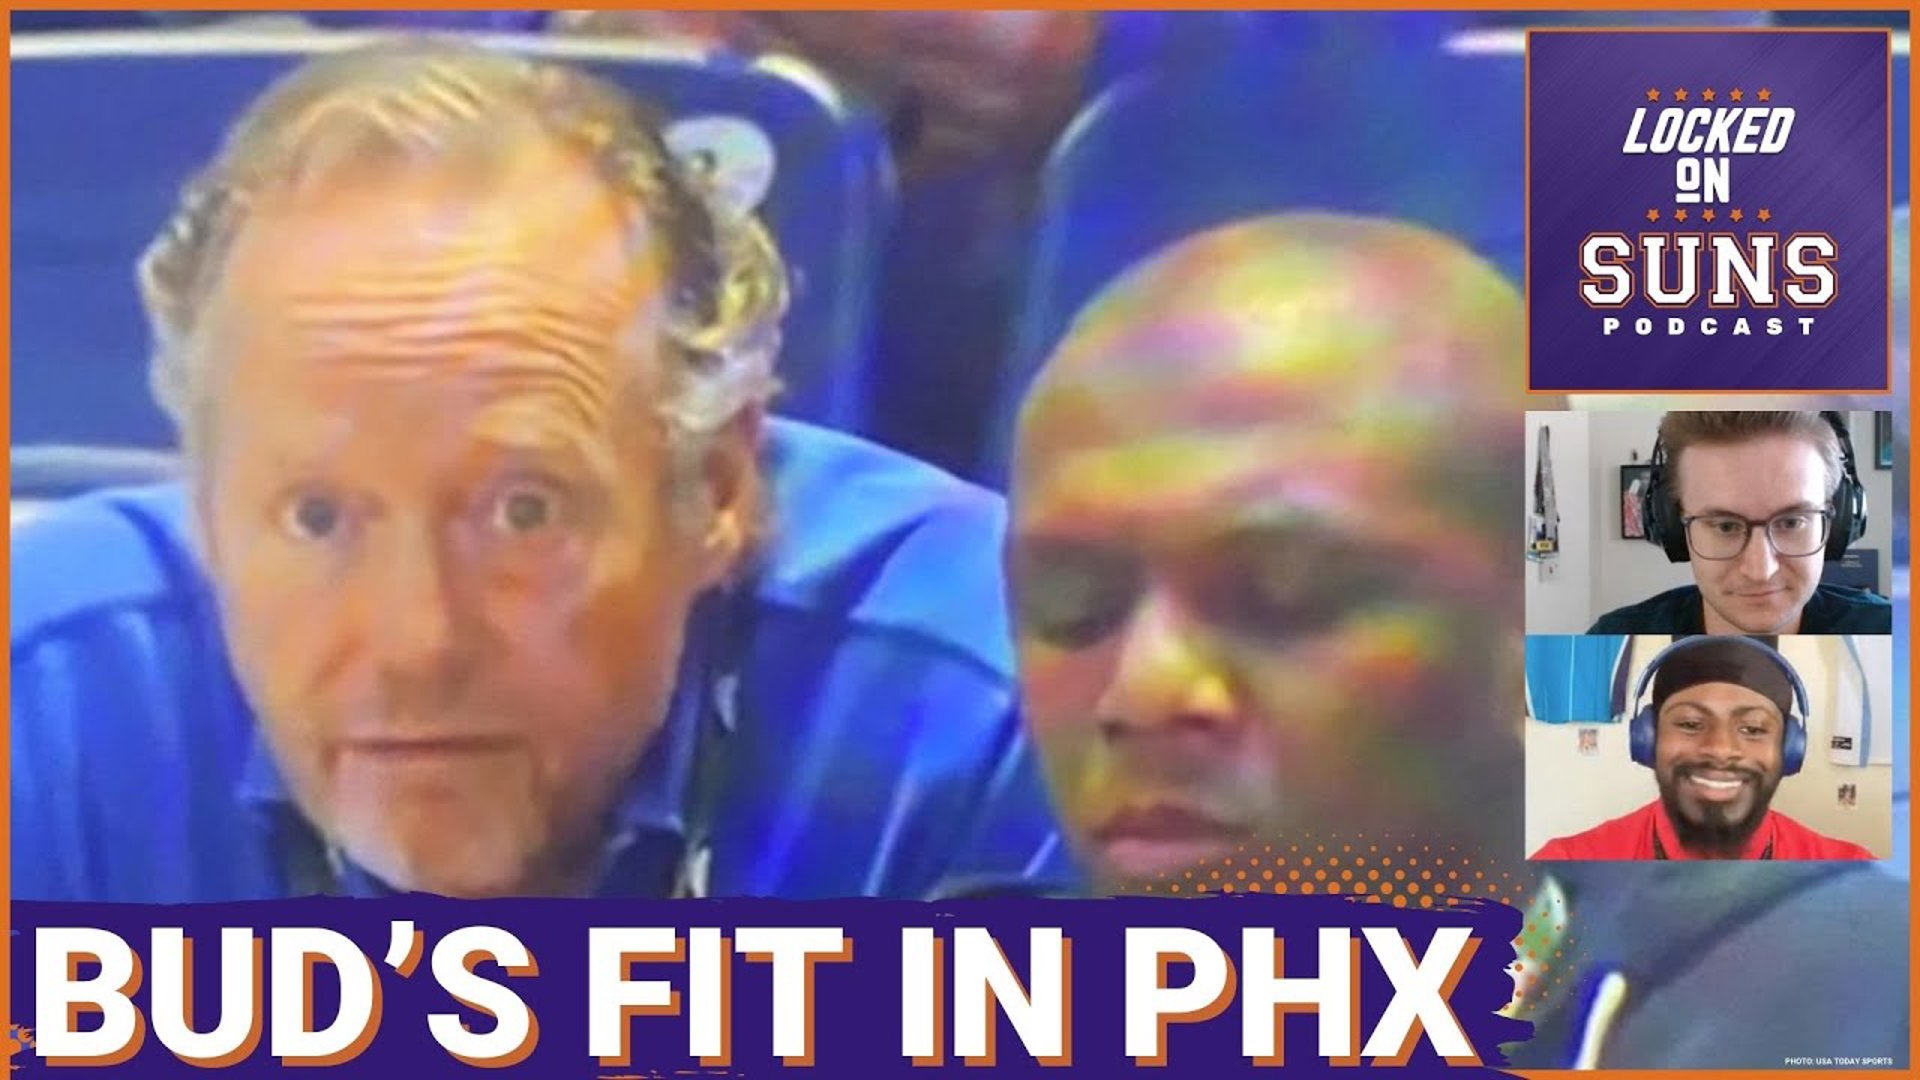 How does Mike Budenholzer fit the Phoenix Suns and vice versa, and can the team's new head coach get them closer to an NBA championship?